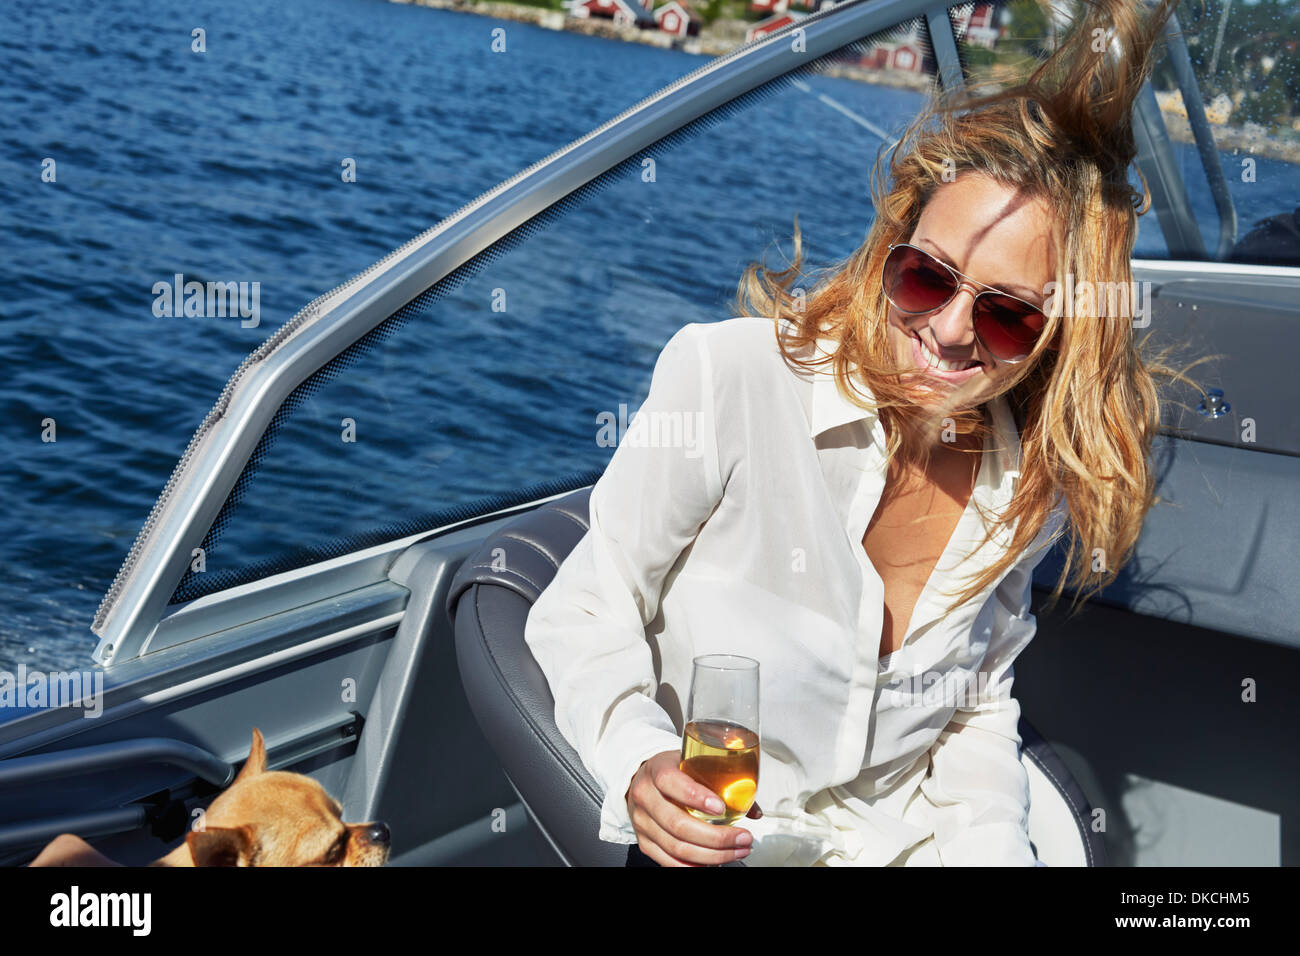 Young woman on boat with glass of wine Stock Photo